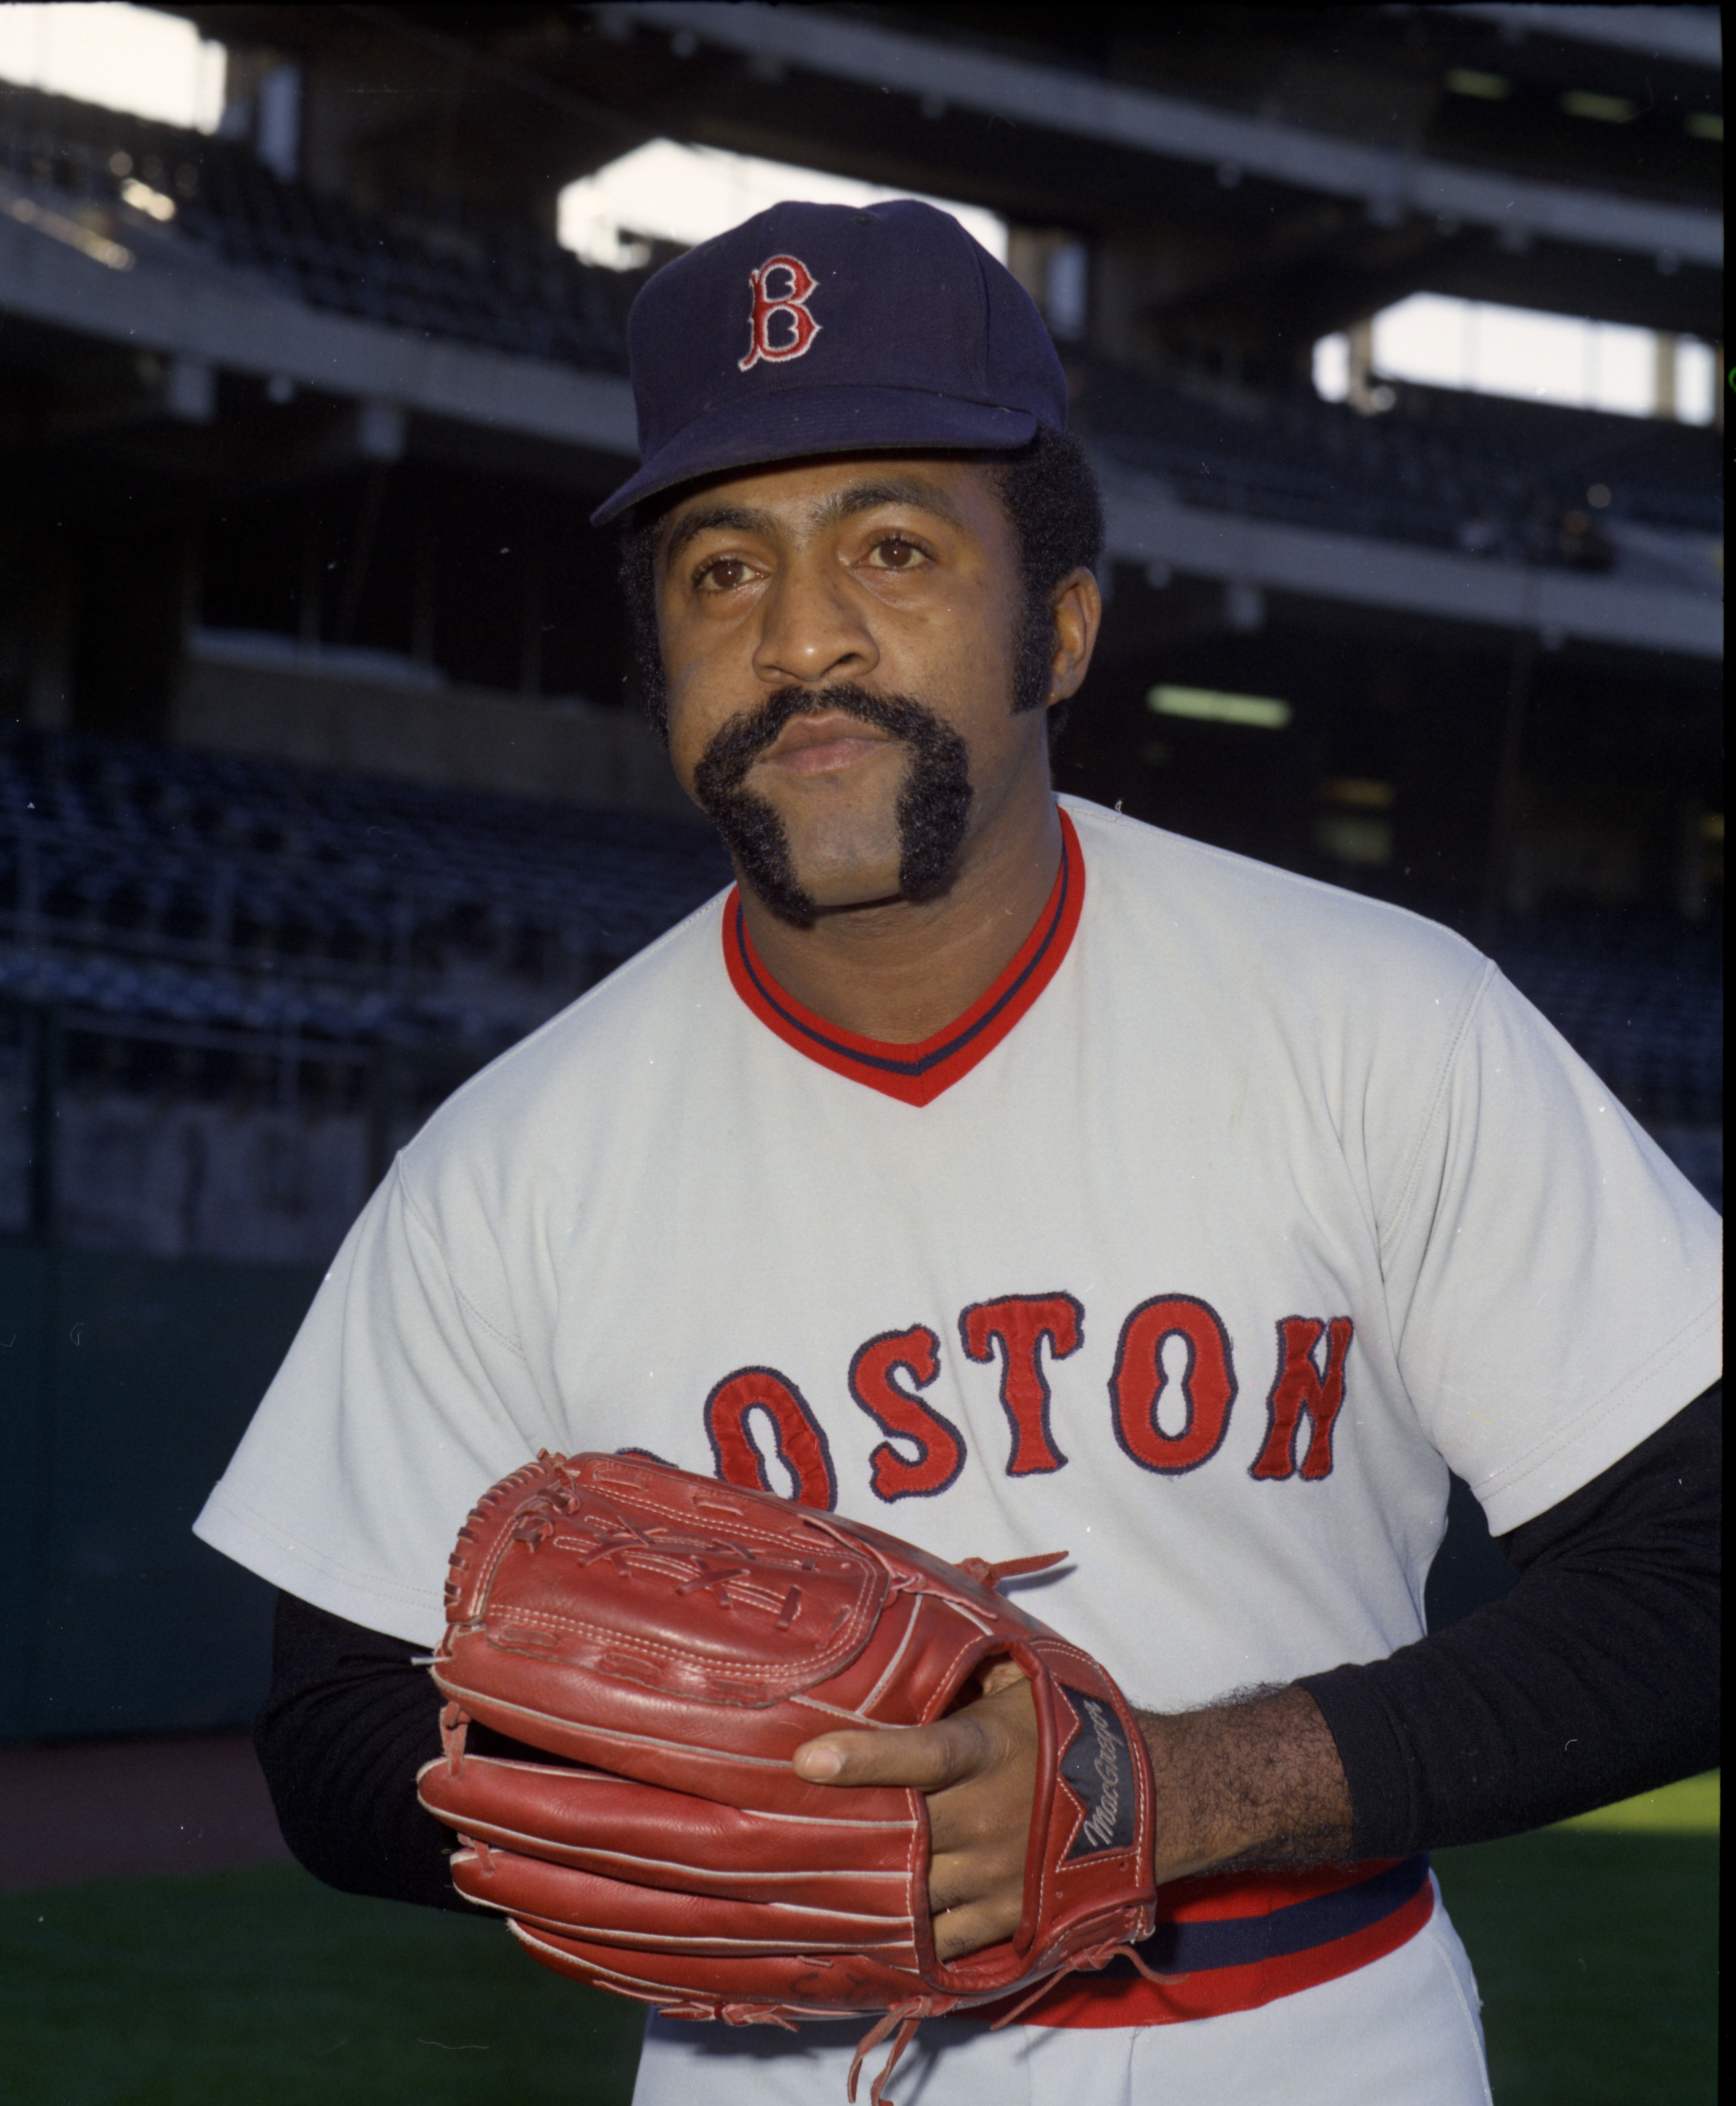 Luis Tiant’s brilliant career landed him on Hall of Fame ballot